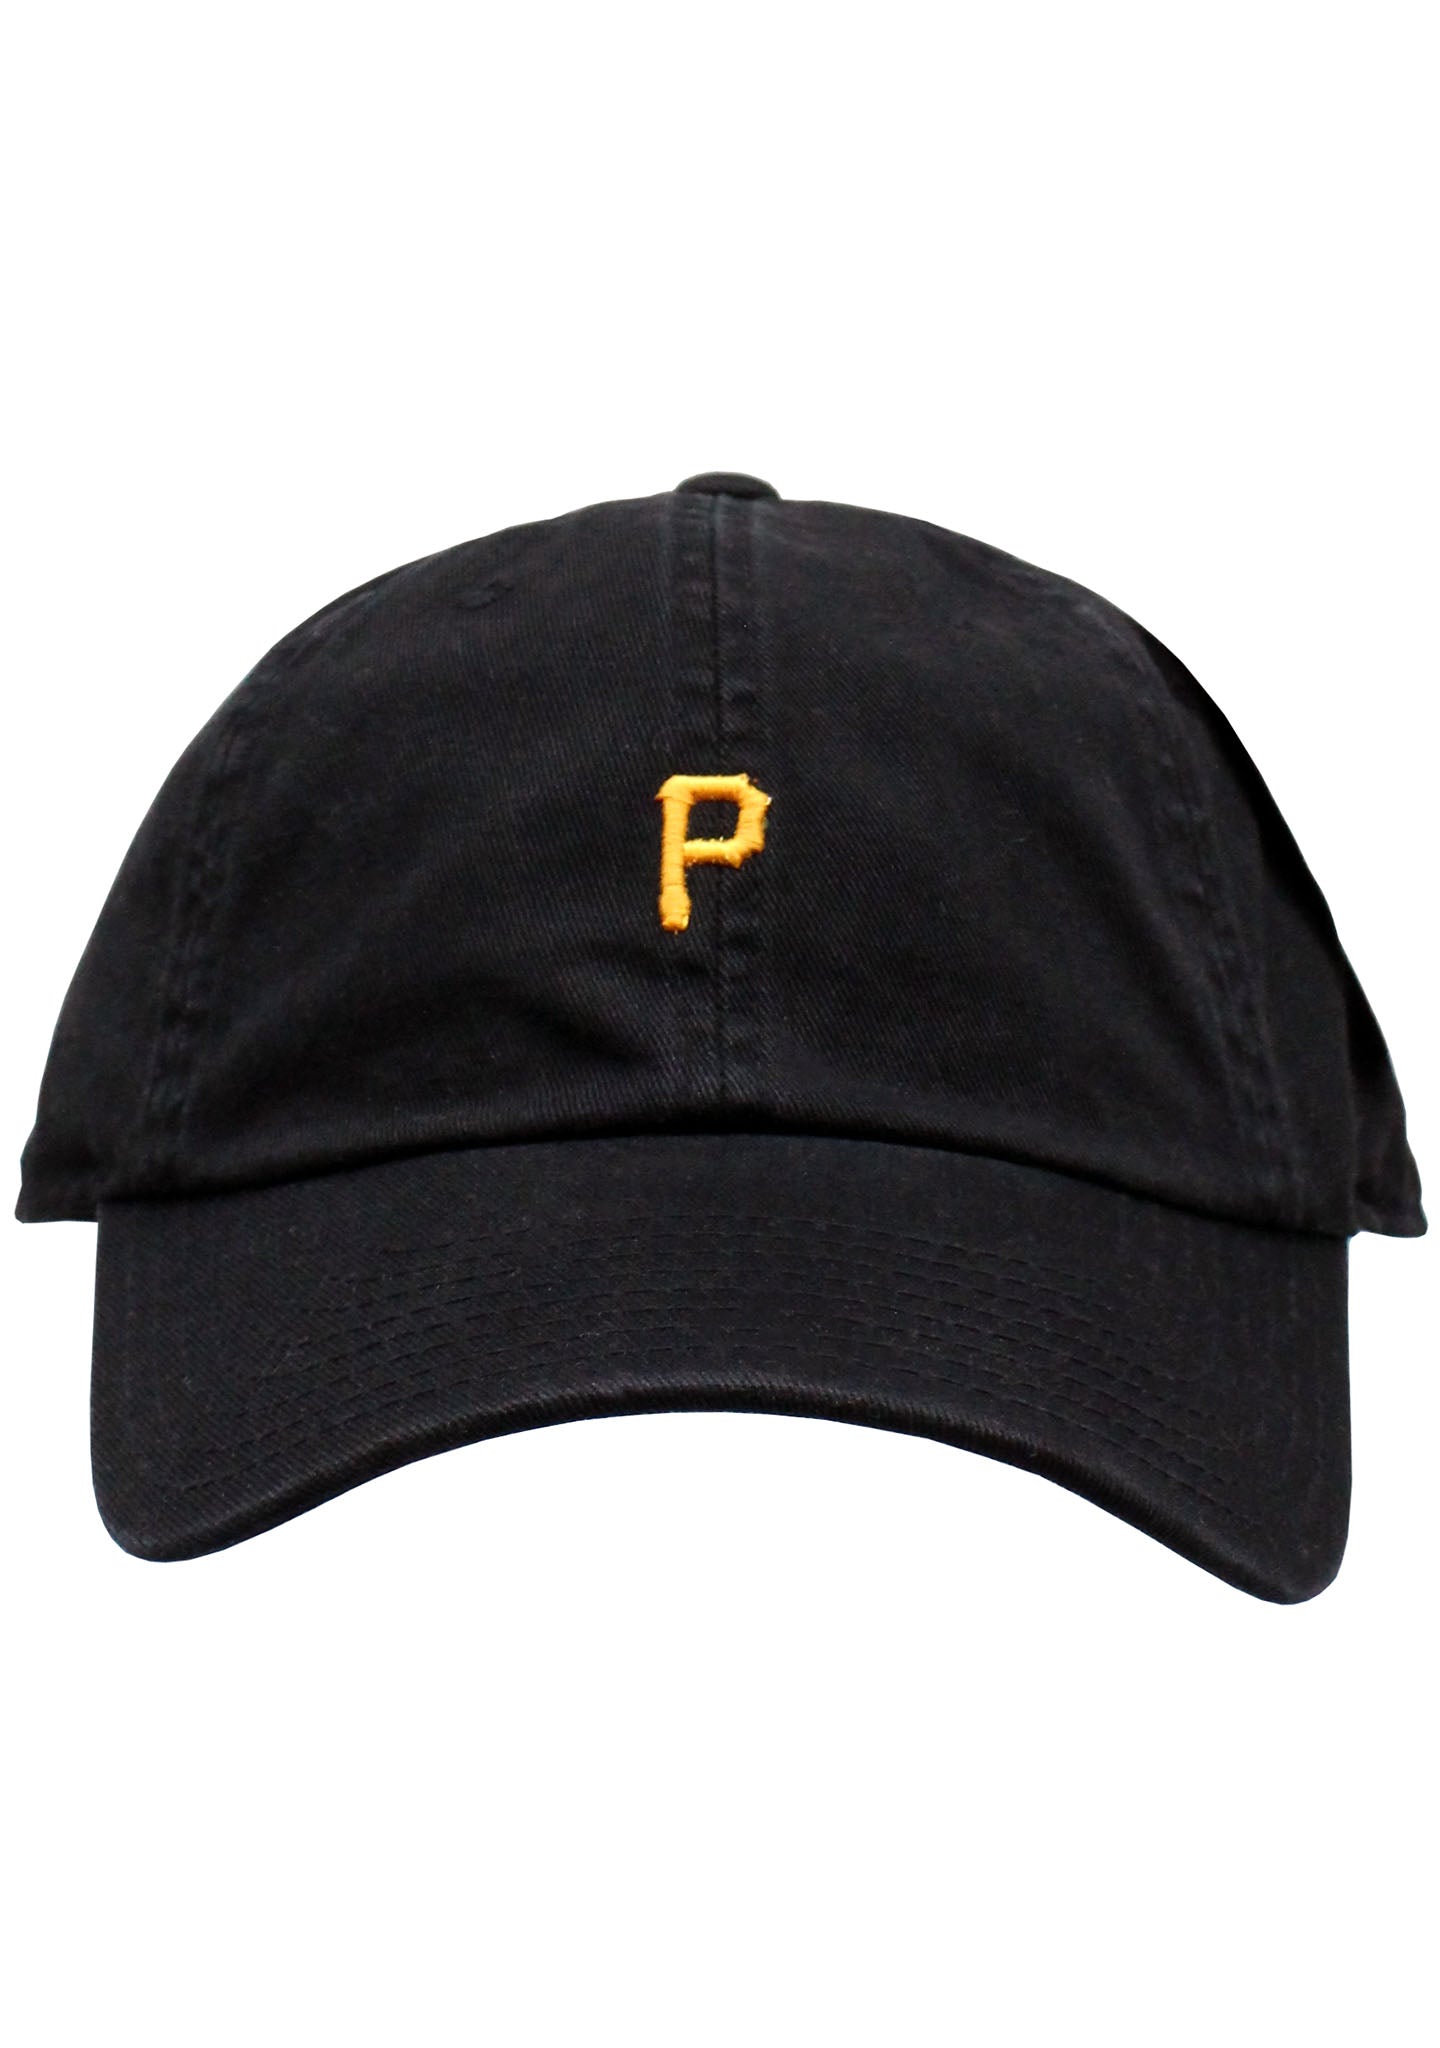 Pittsburgh Pirates, Shop MLB Team Bags & Accessories